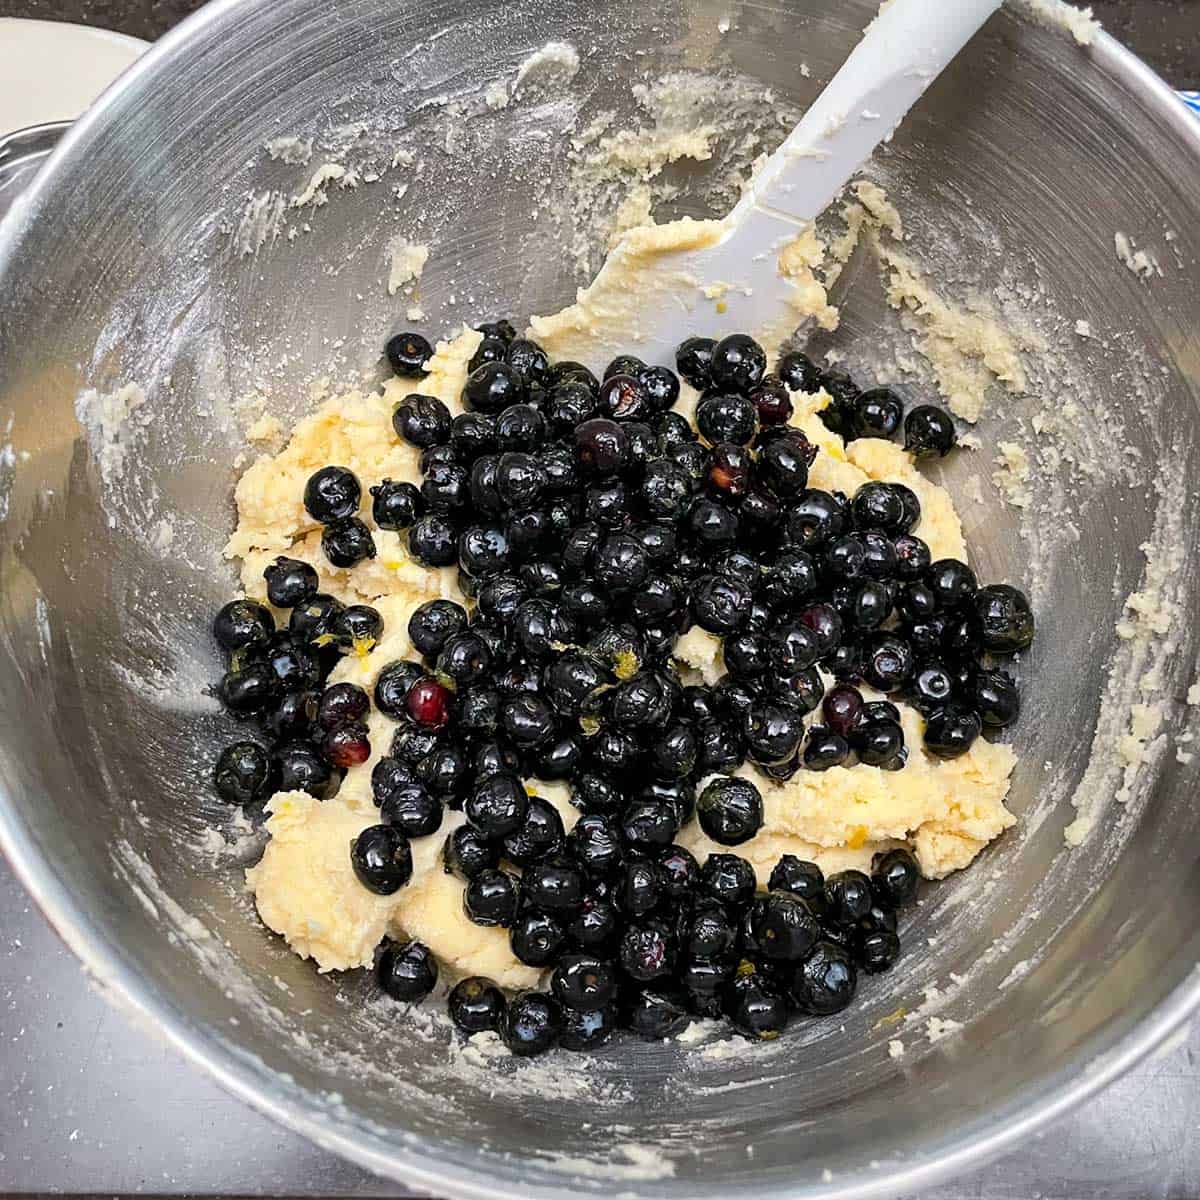 Adding the infused blueberries to the cookie batter.